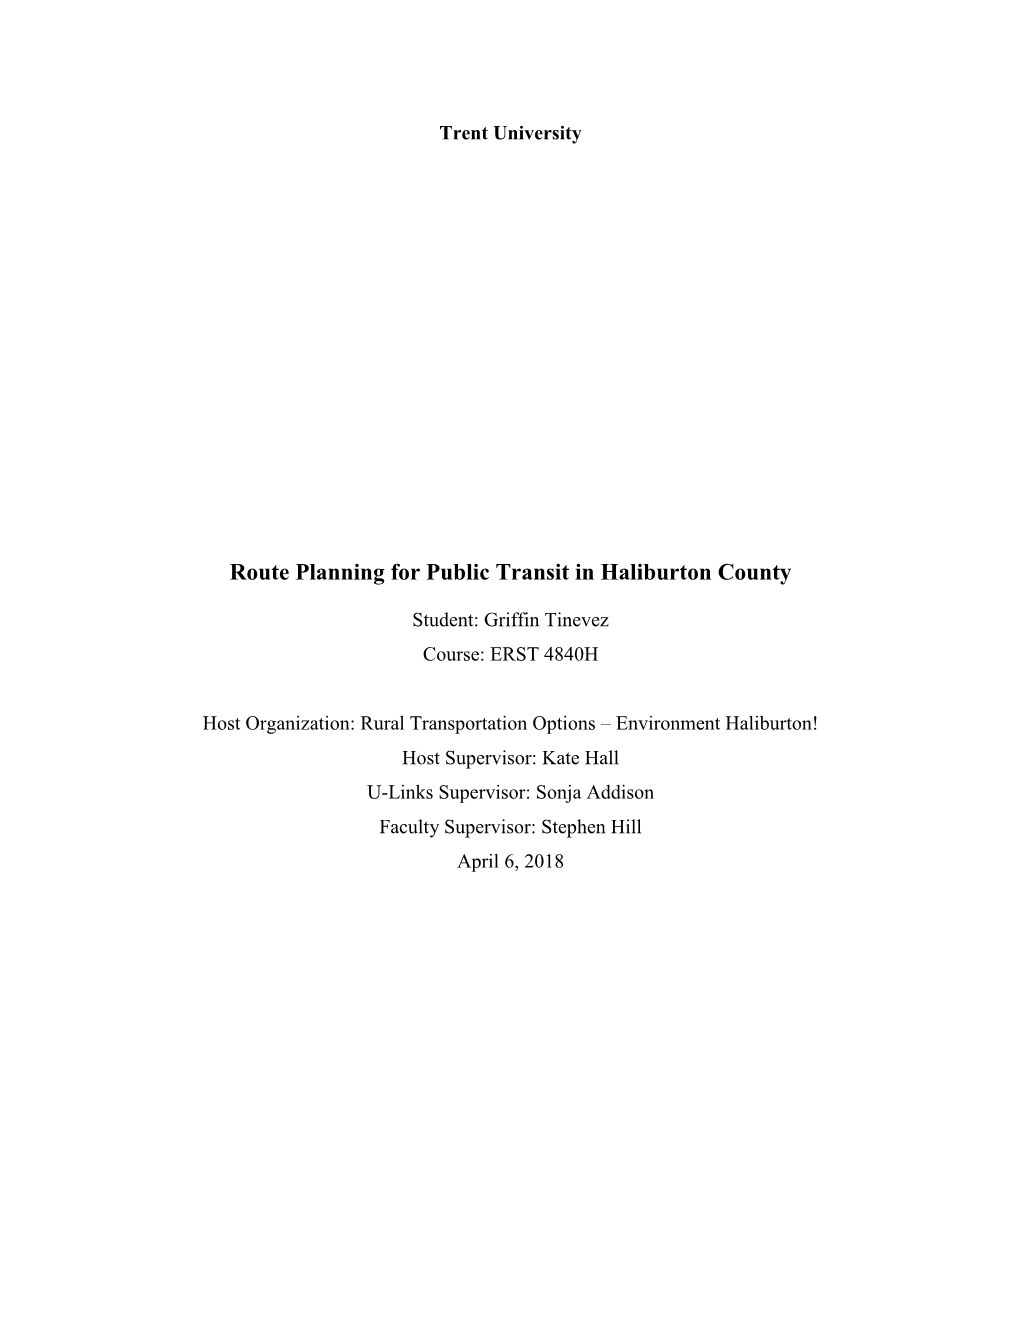 ULINKS-Route-Planning-For-Public-Transit-FINAL-2018.Pdf